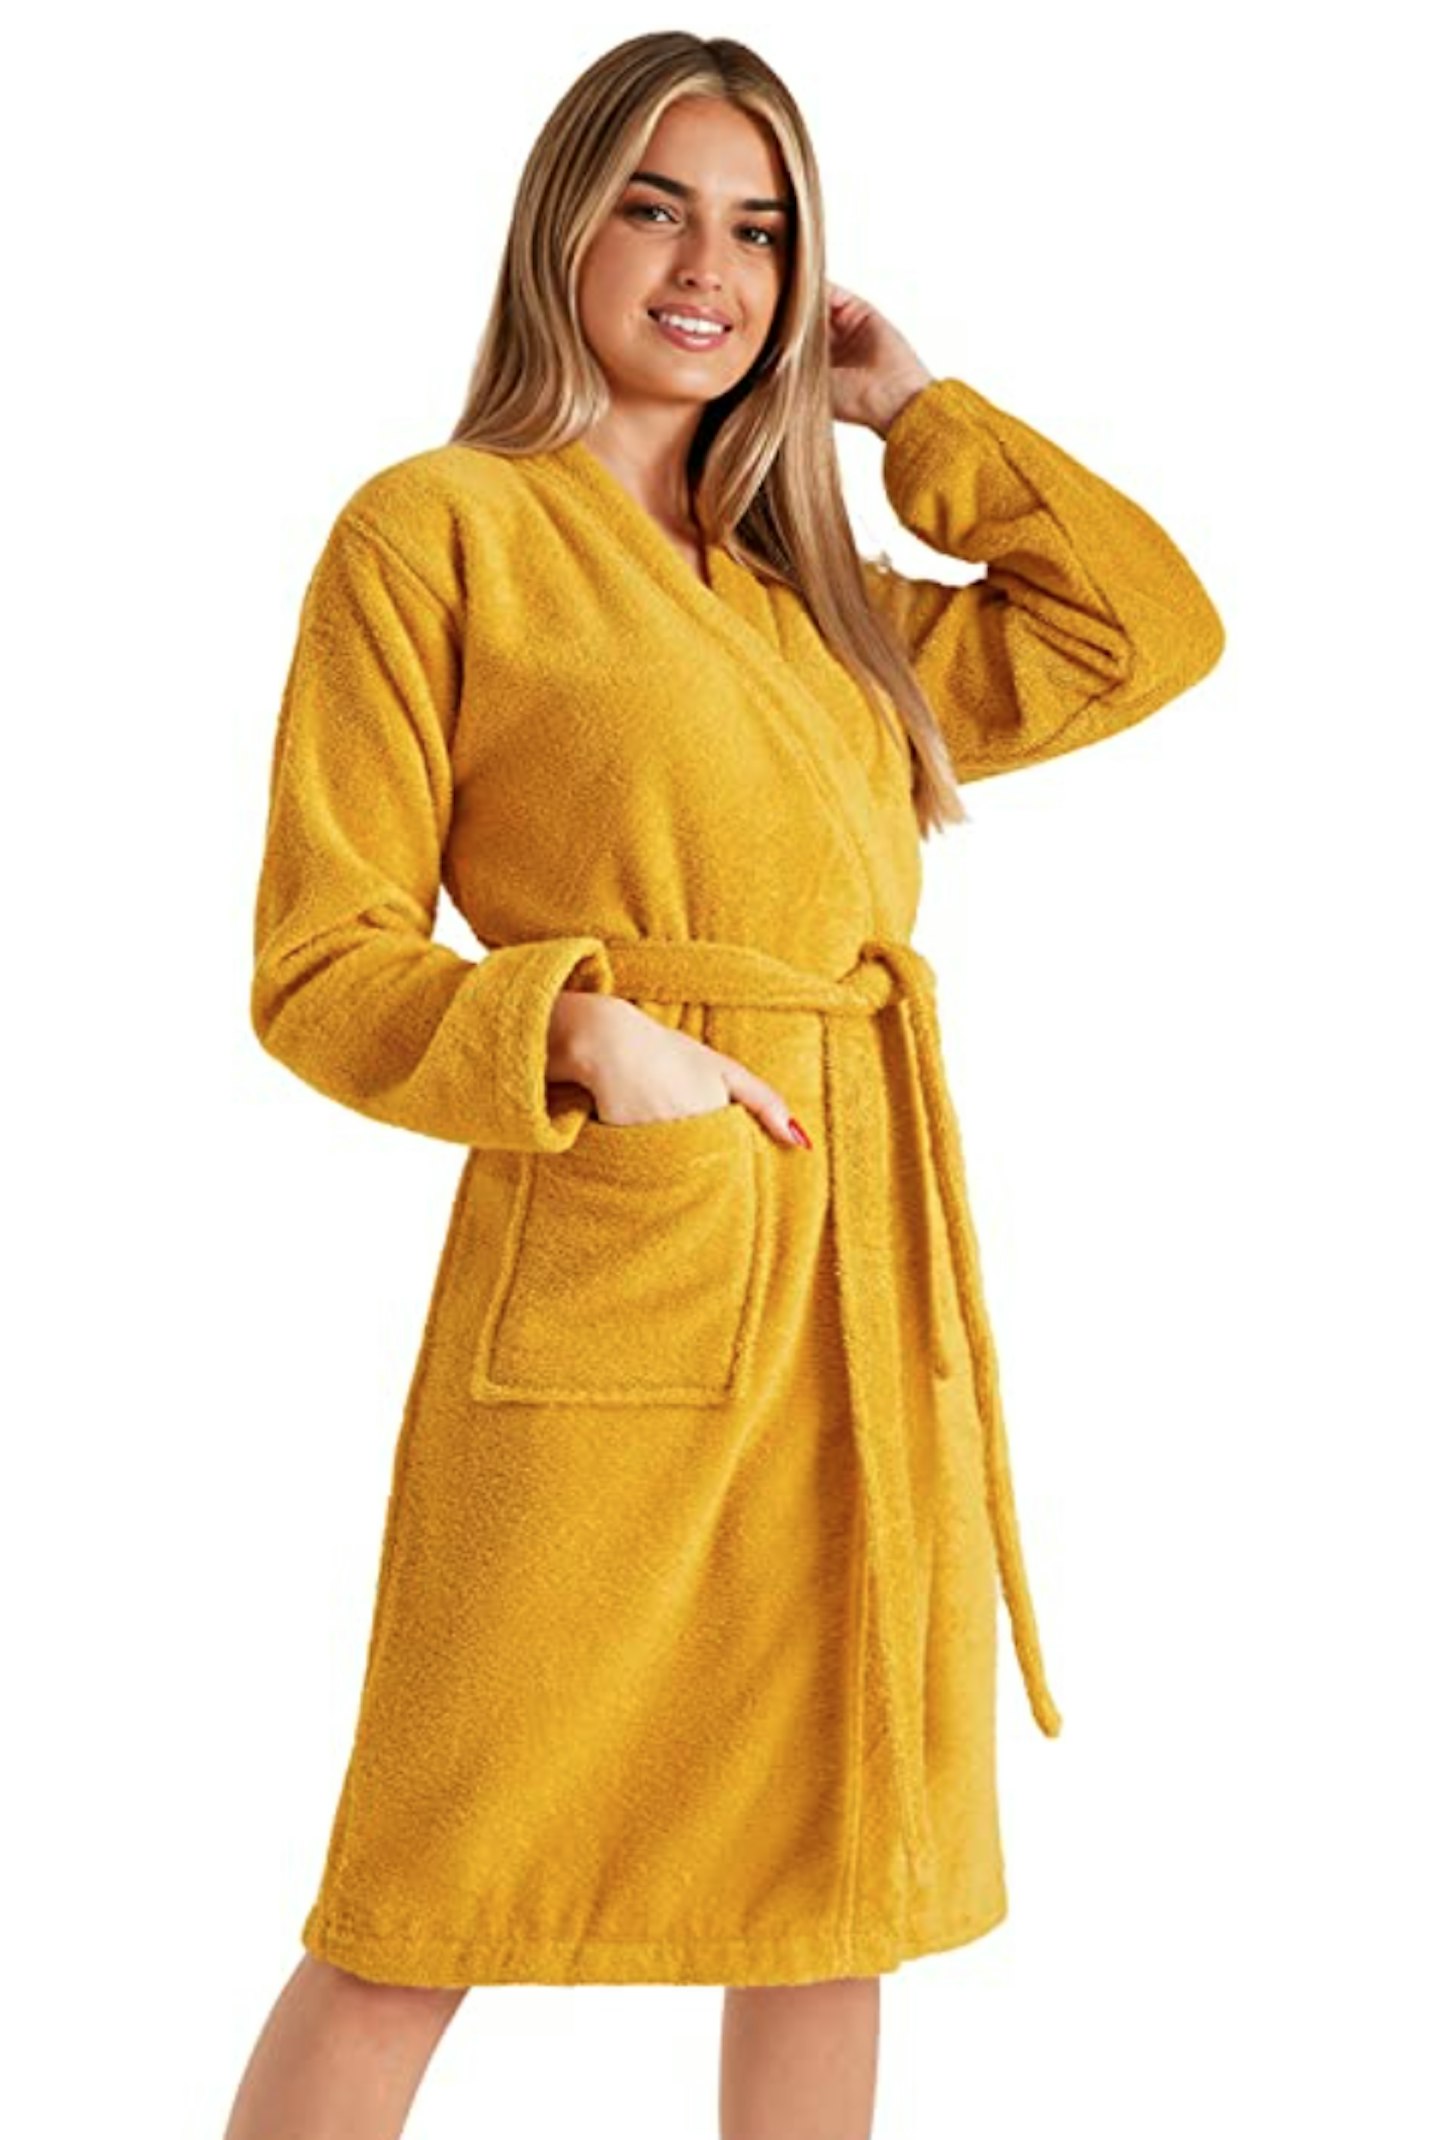 CityComfort Towelling Robes Mens and Women, Terry Bathrobe XS, S, M, L, XL, 2XL